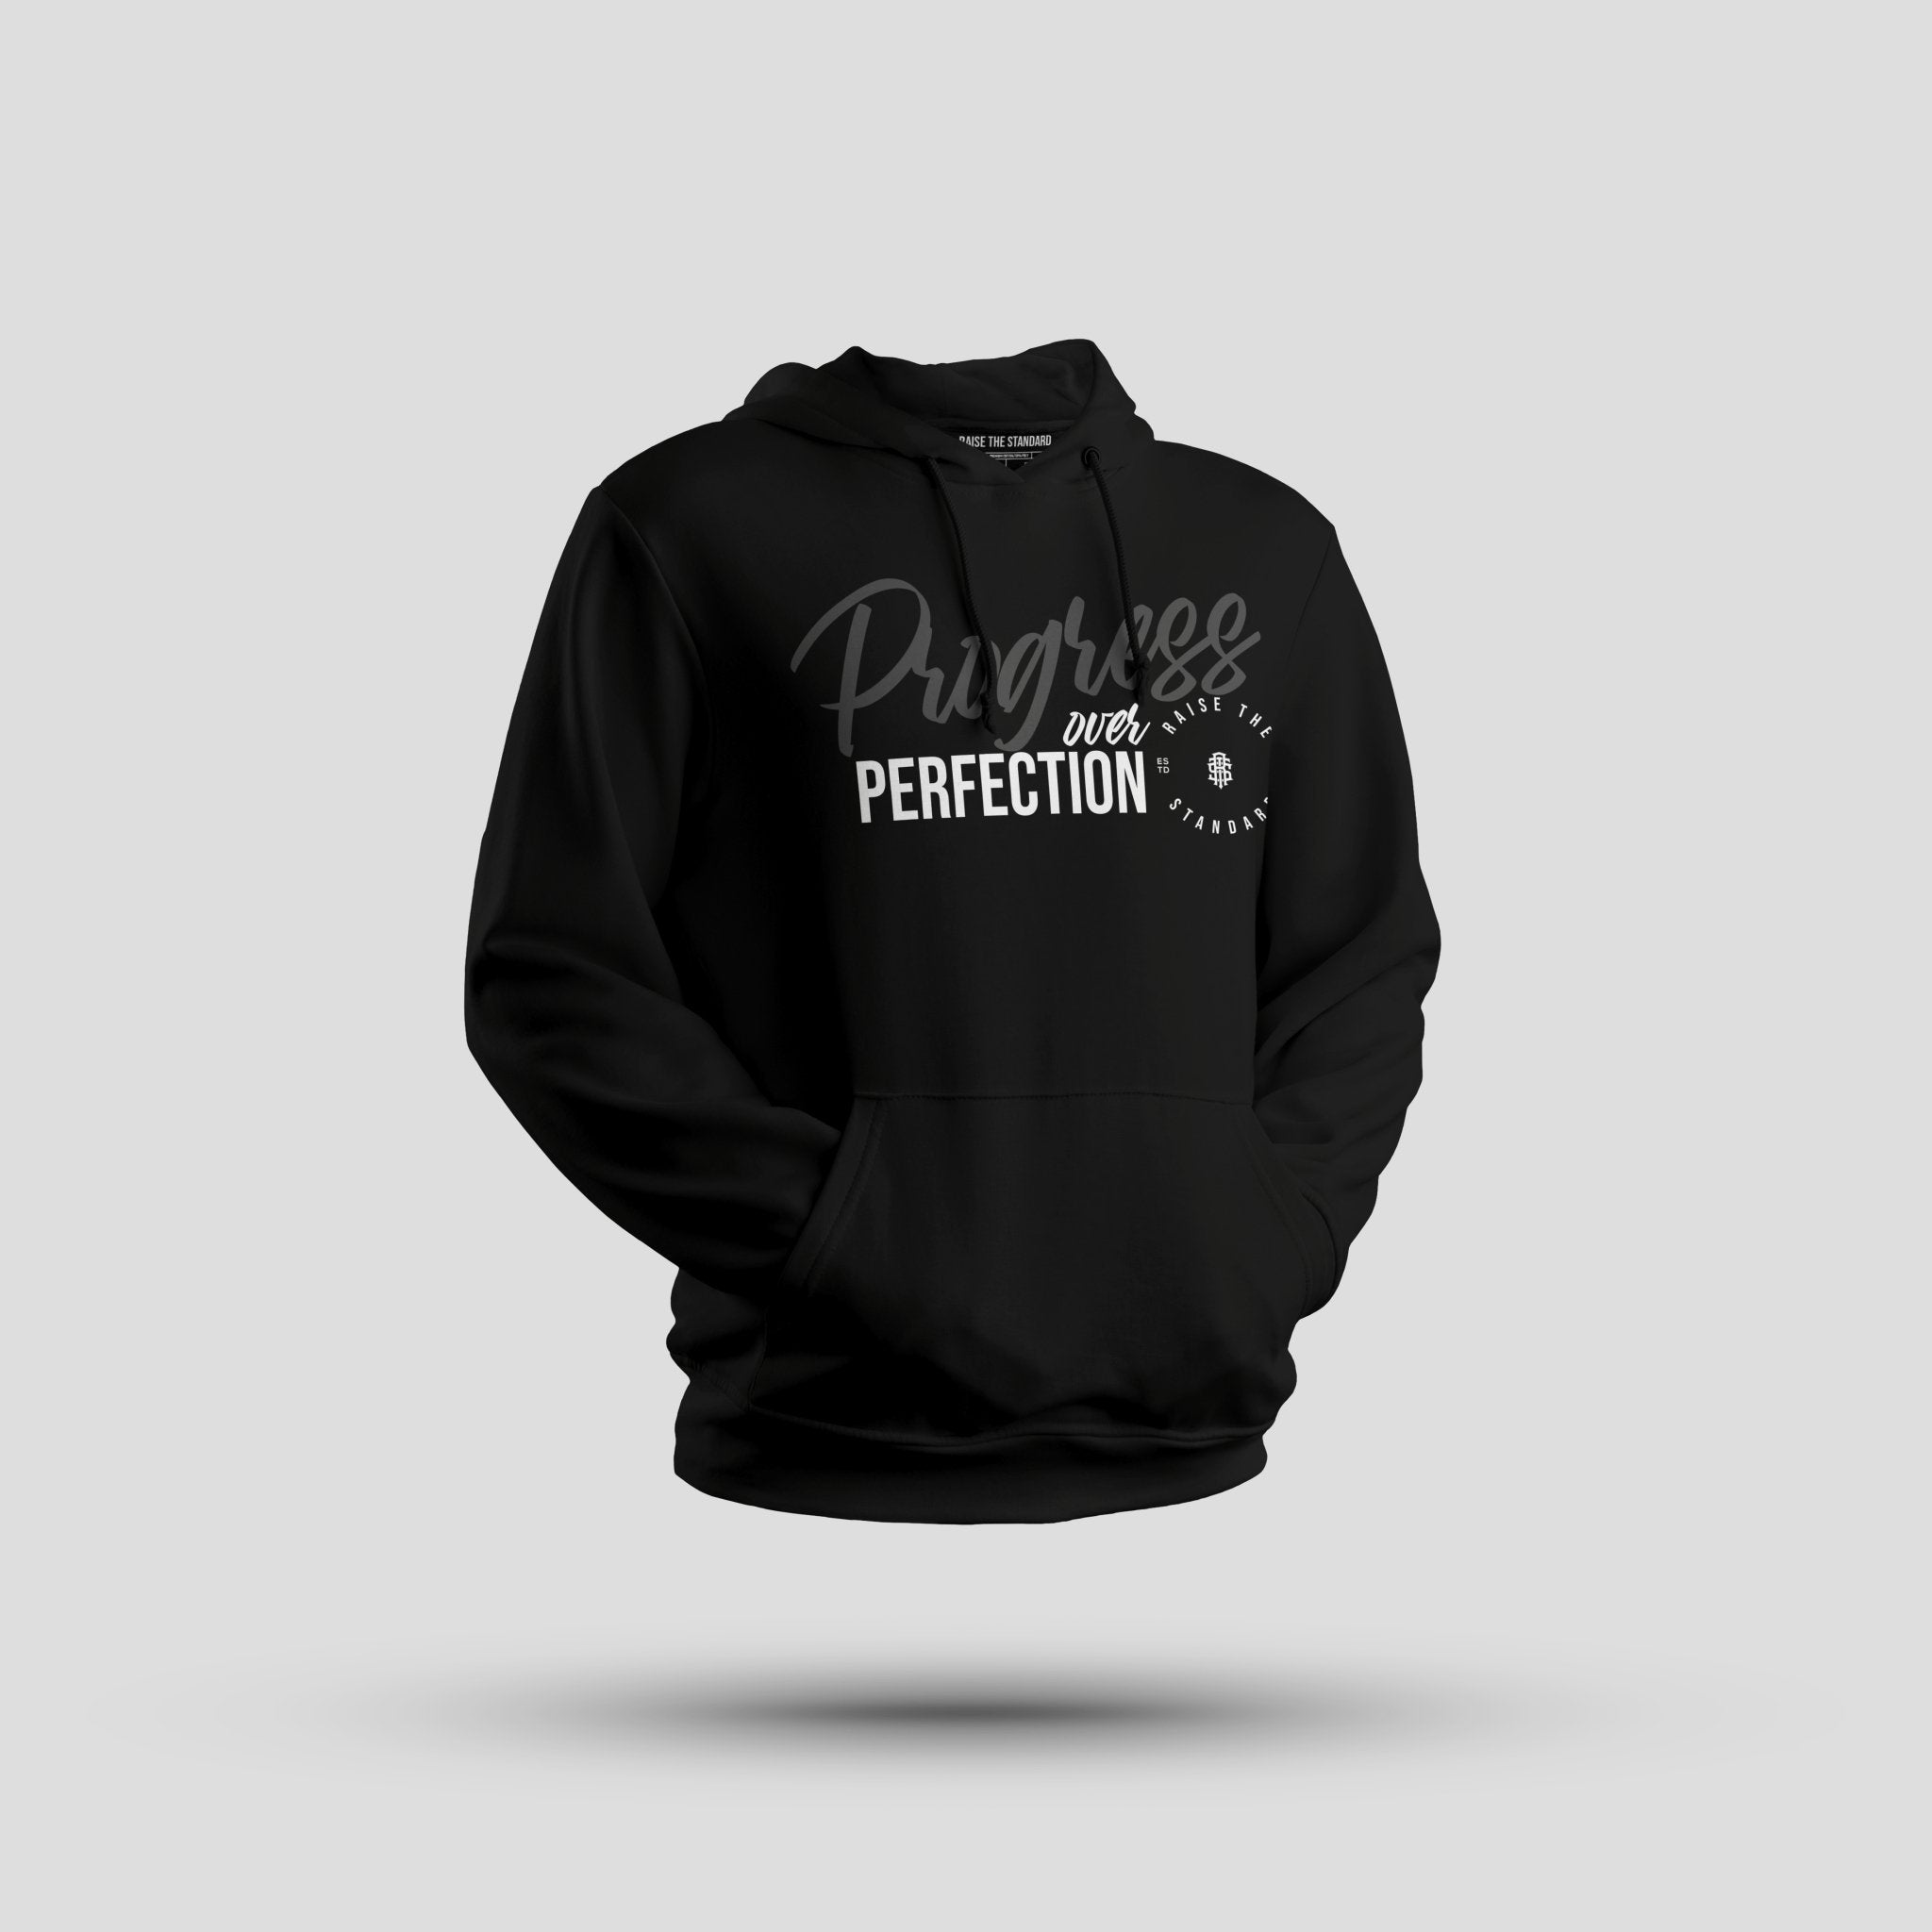 Progress Over Perfection Hoodie - Raise The Standard Apparel